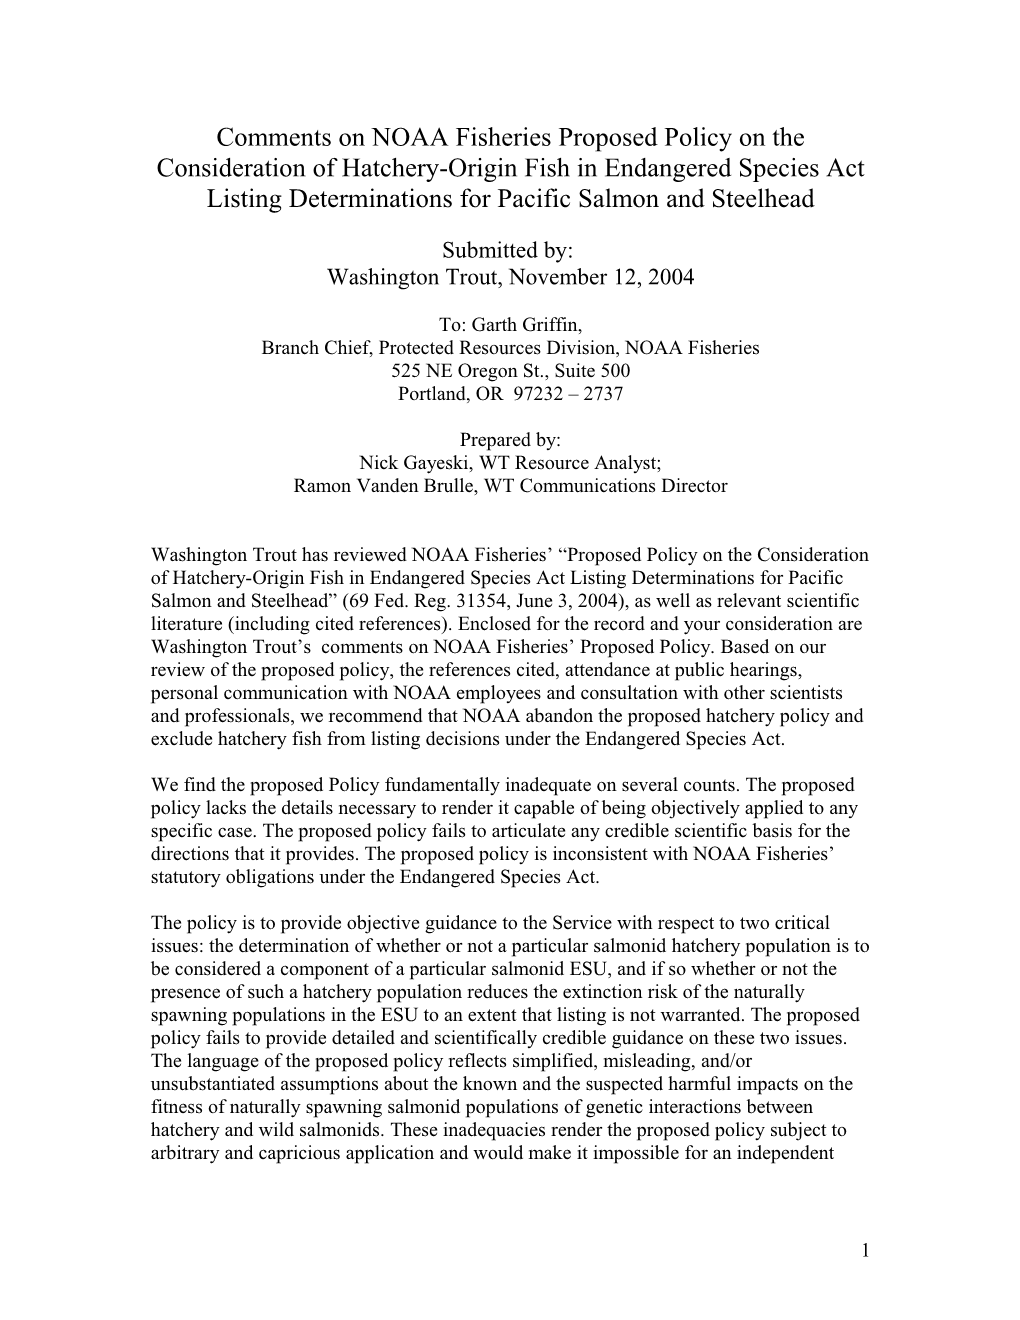 Comments on NOAA Fisheries Proposed Policy on the Consideration of Hatchery-Origin Fish